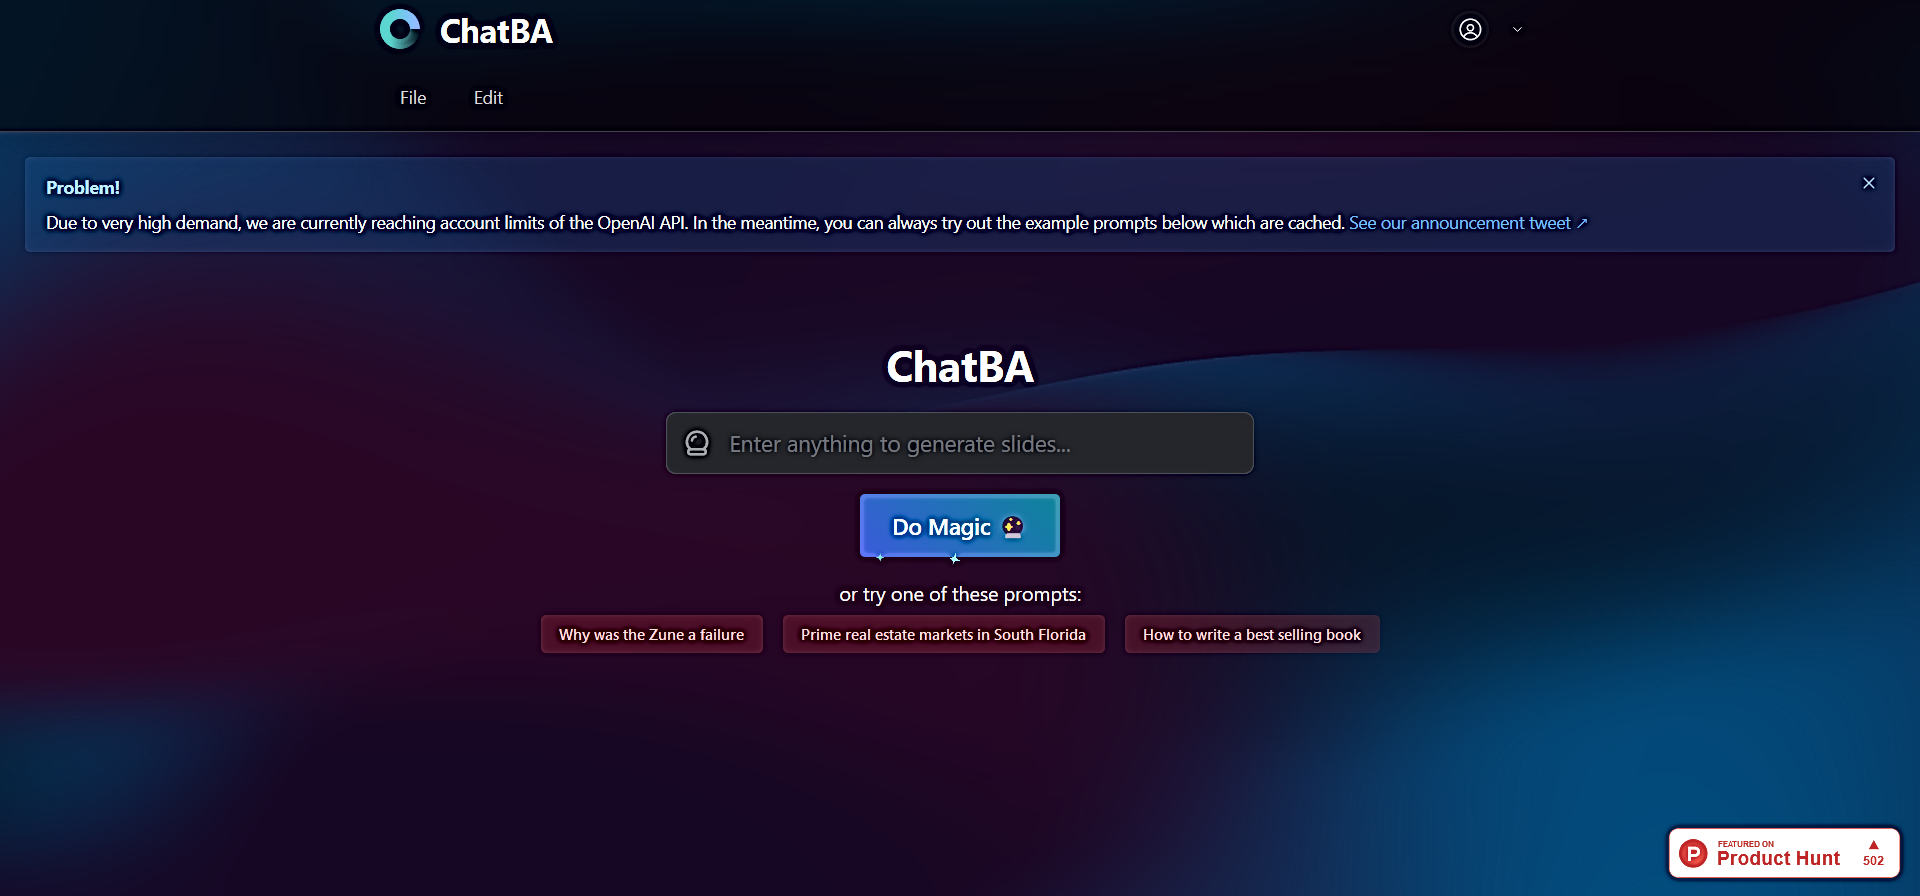 ChatBA featured